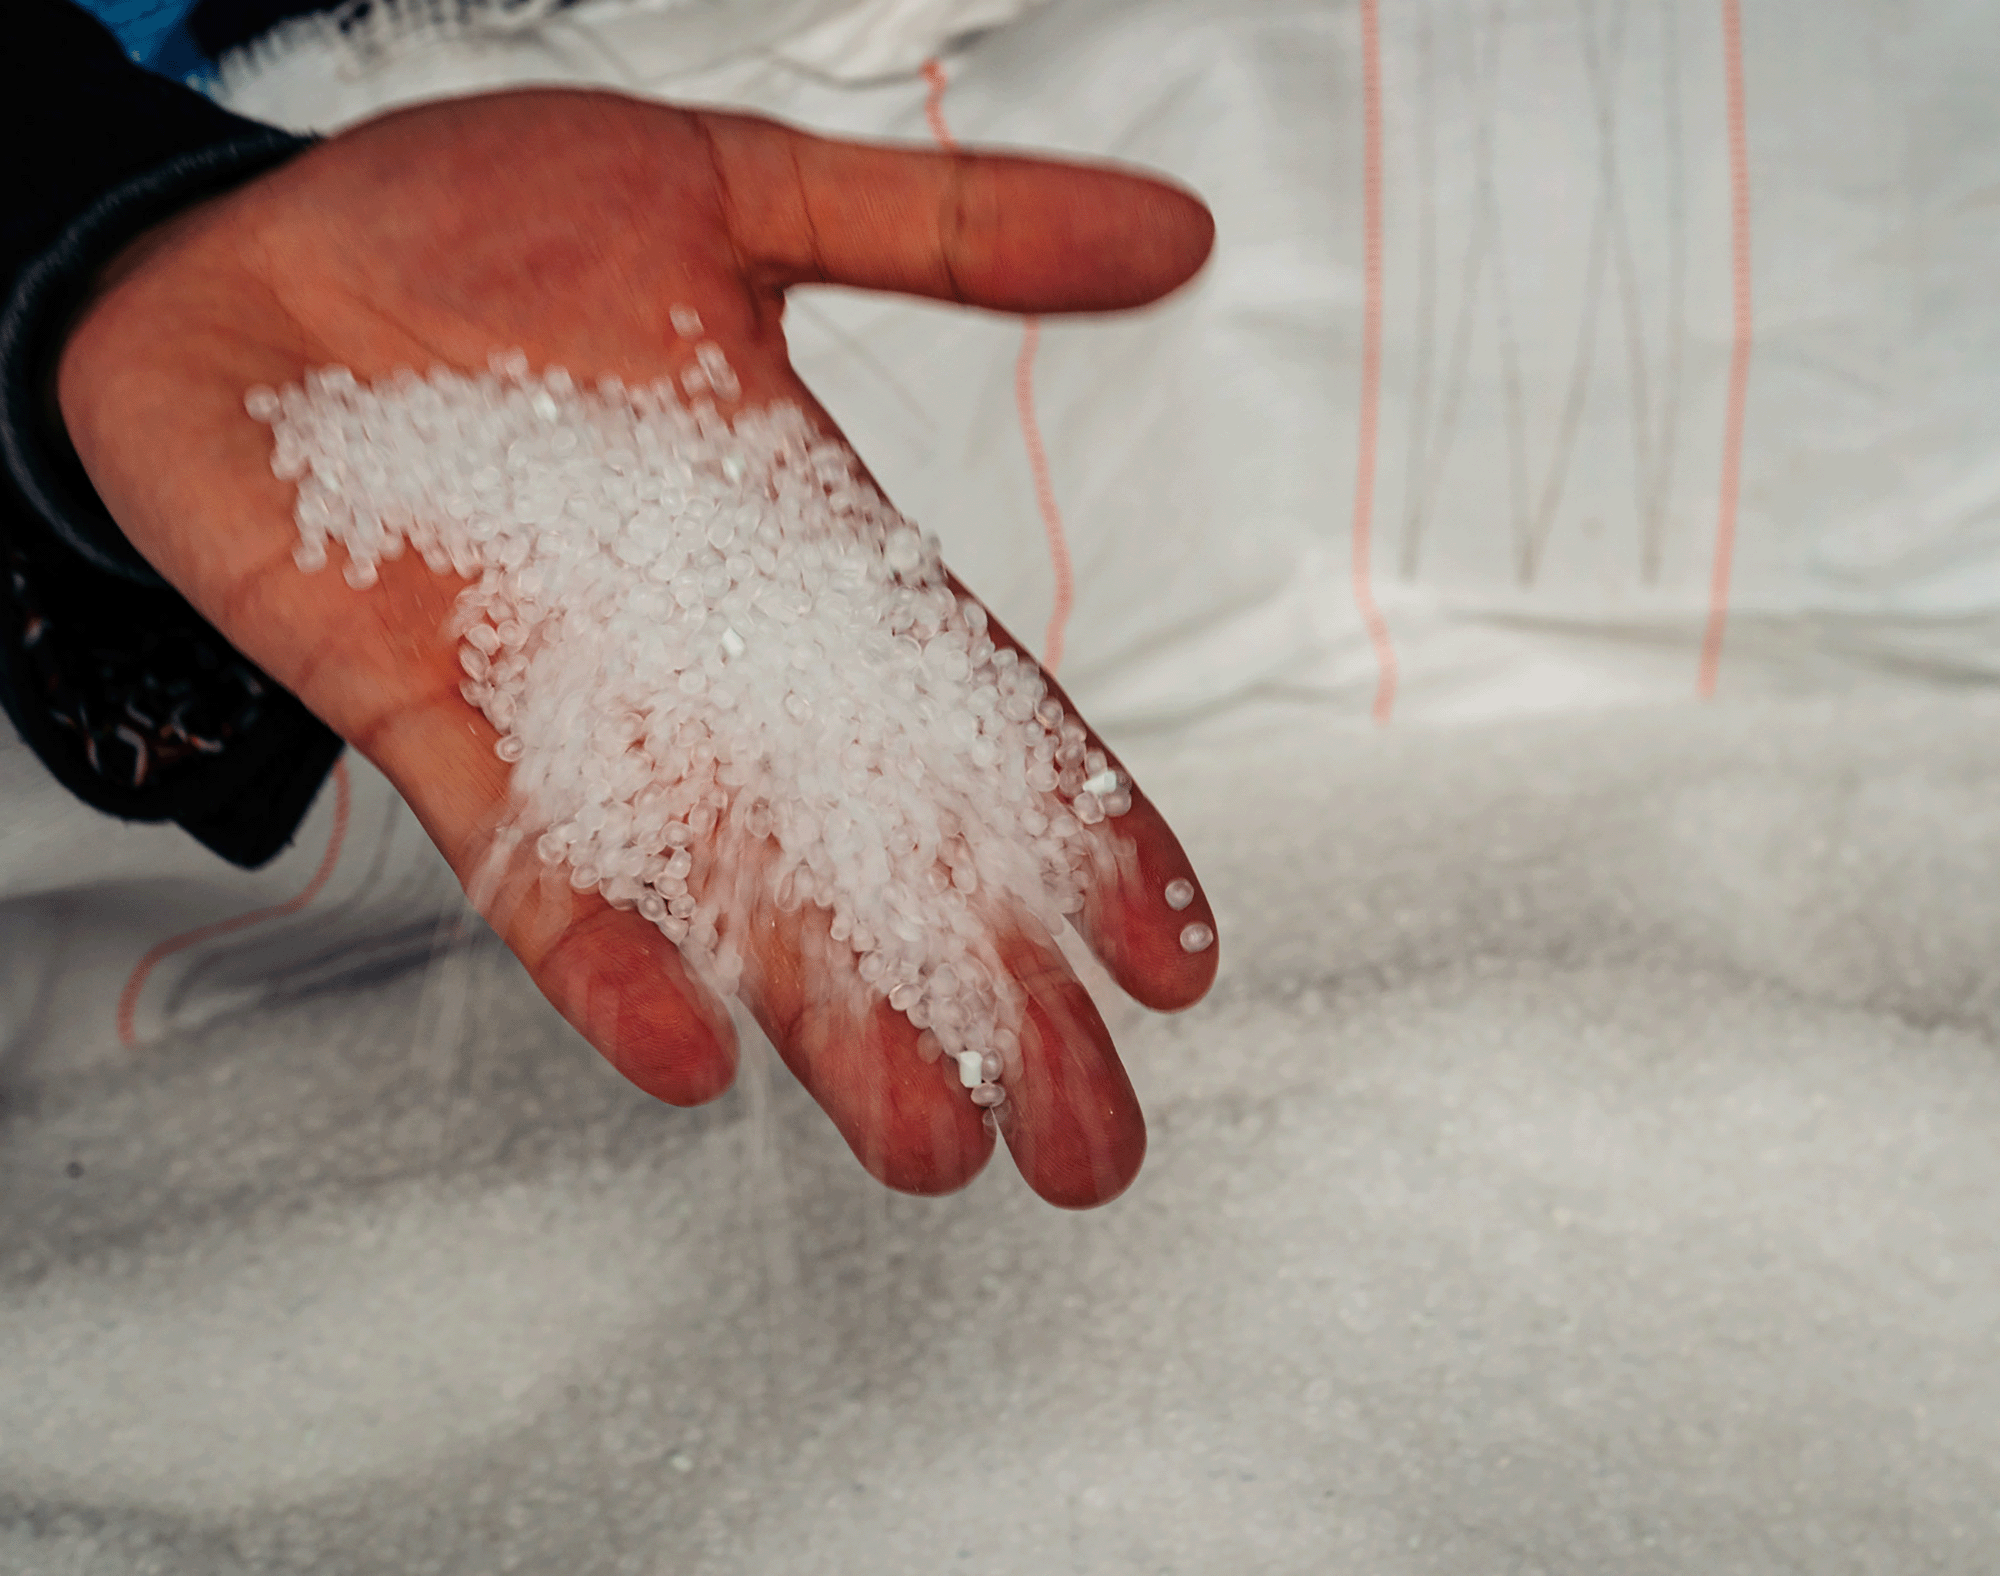 Photo showing a handful of tiny white plastic pellets.